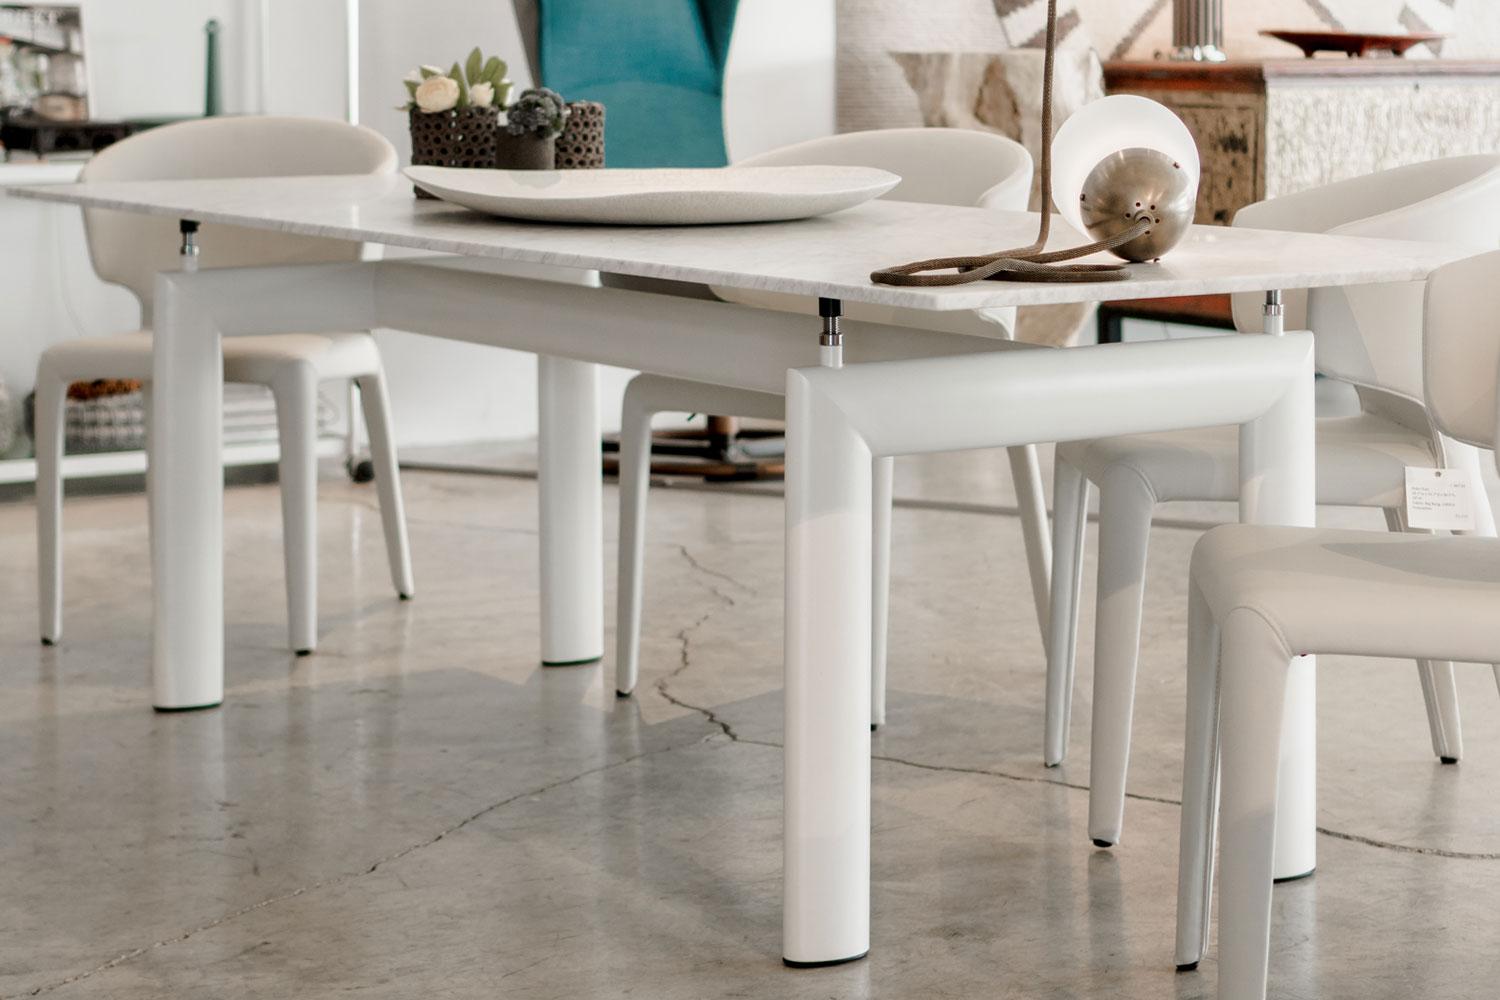 The base of this LC 6 table from Cassina has four supporting points with steel threaded shanks, permitting height adjustment up to 2”. The Carrara top with ivory enameled base makes this table a versatile kitchen or dining table. Please note